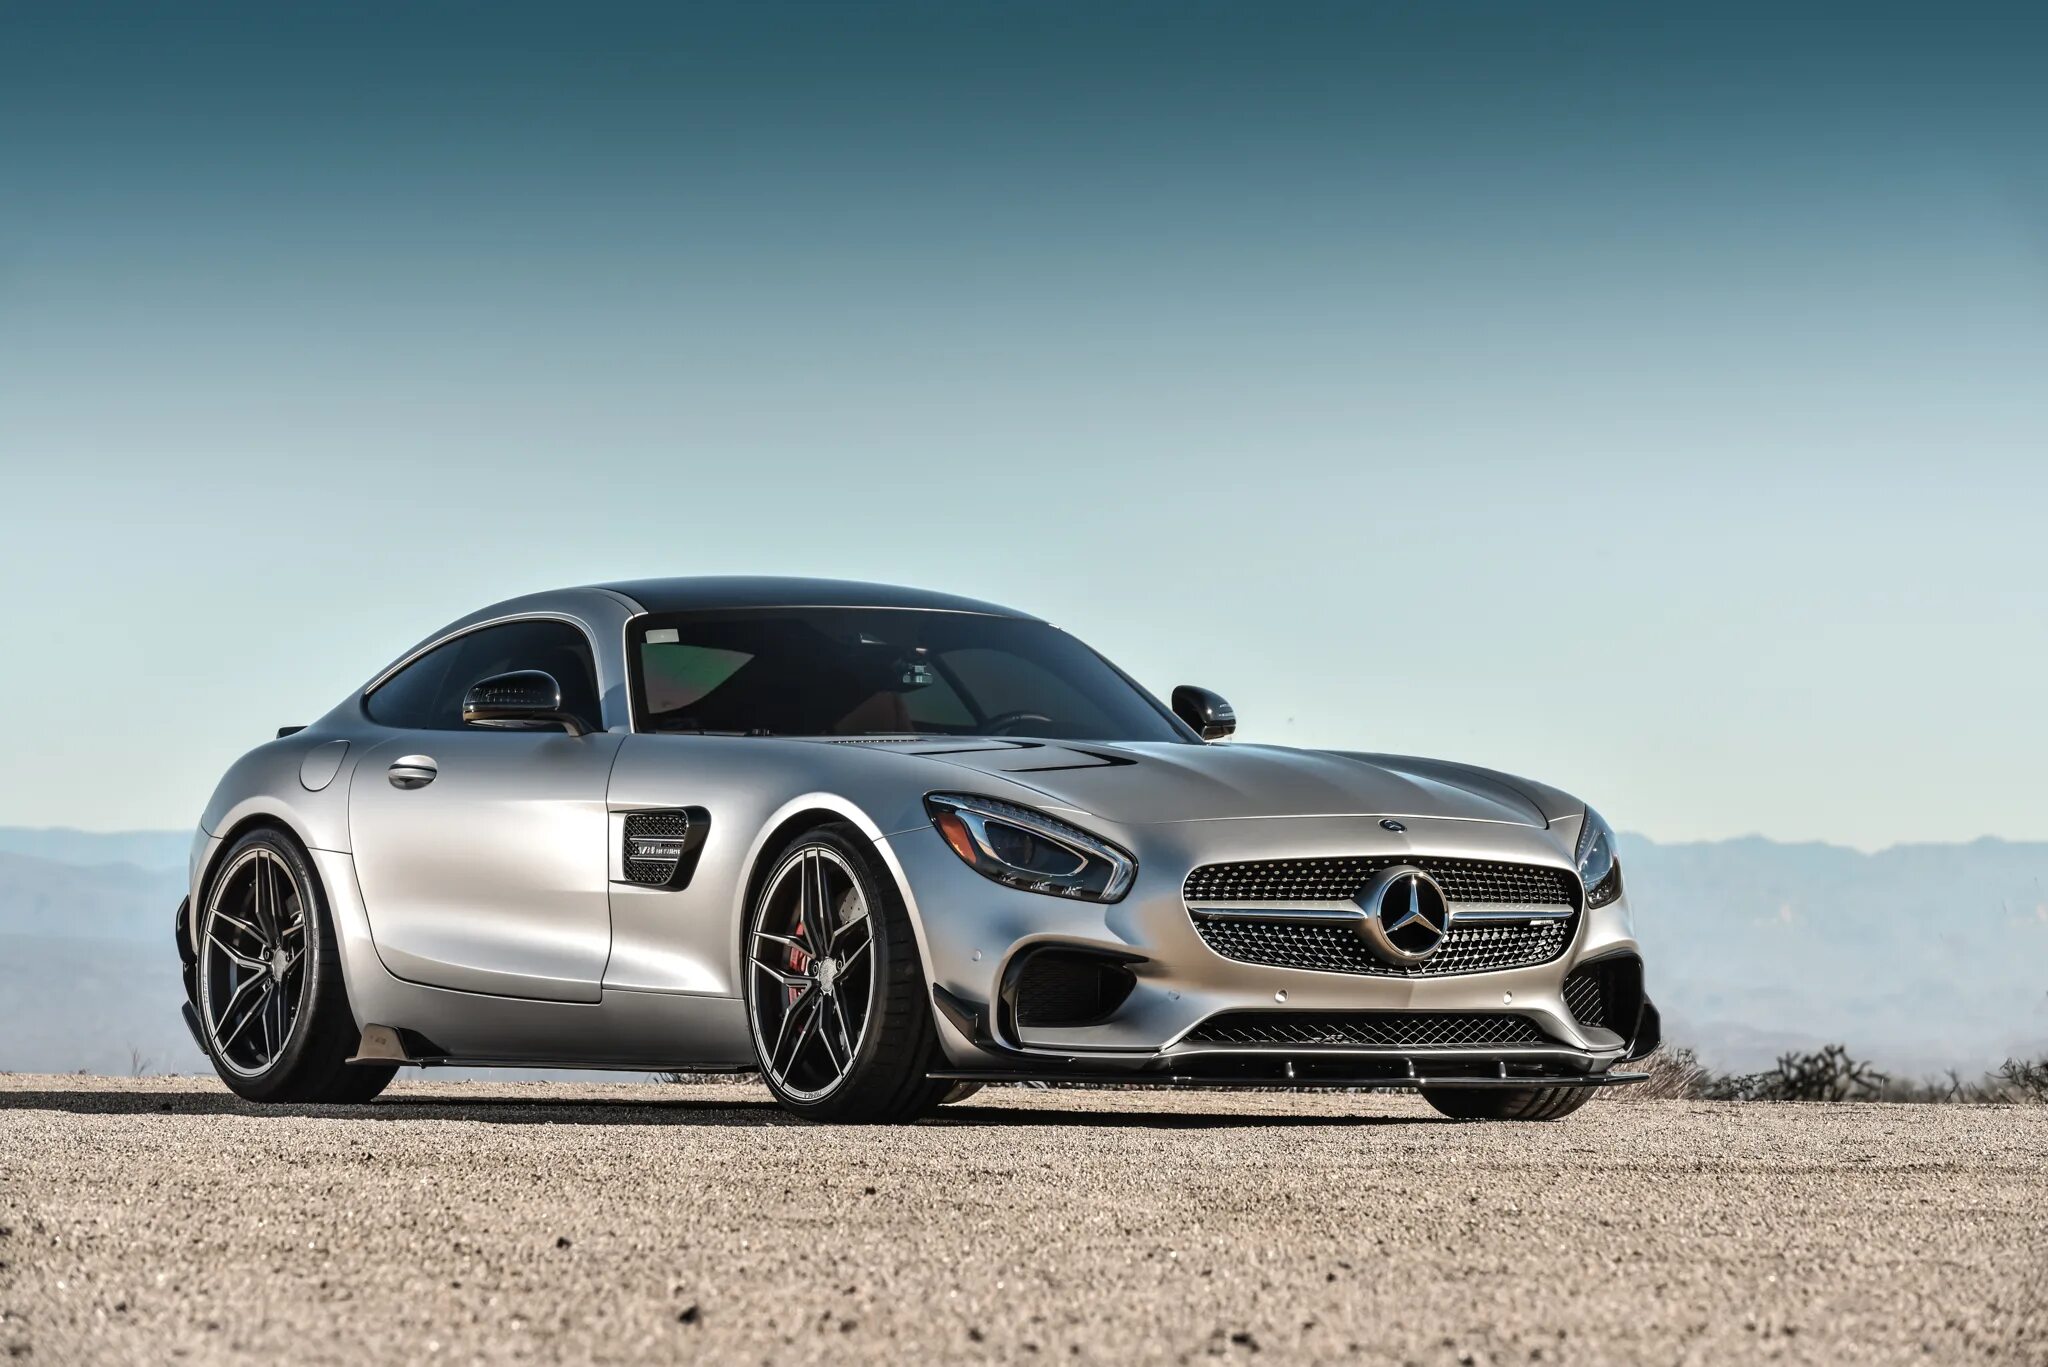 Mercedes AMG GTS 2017. Мерседес АМГ gt s 2017. Mercedes GTS 2019. Mercedes AMG. GTS. V8. 2019.. Мерседес gt s